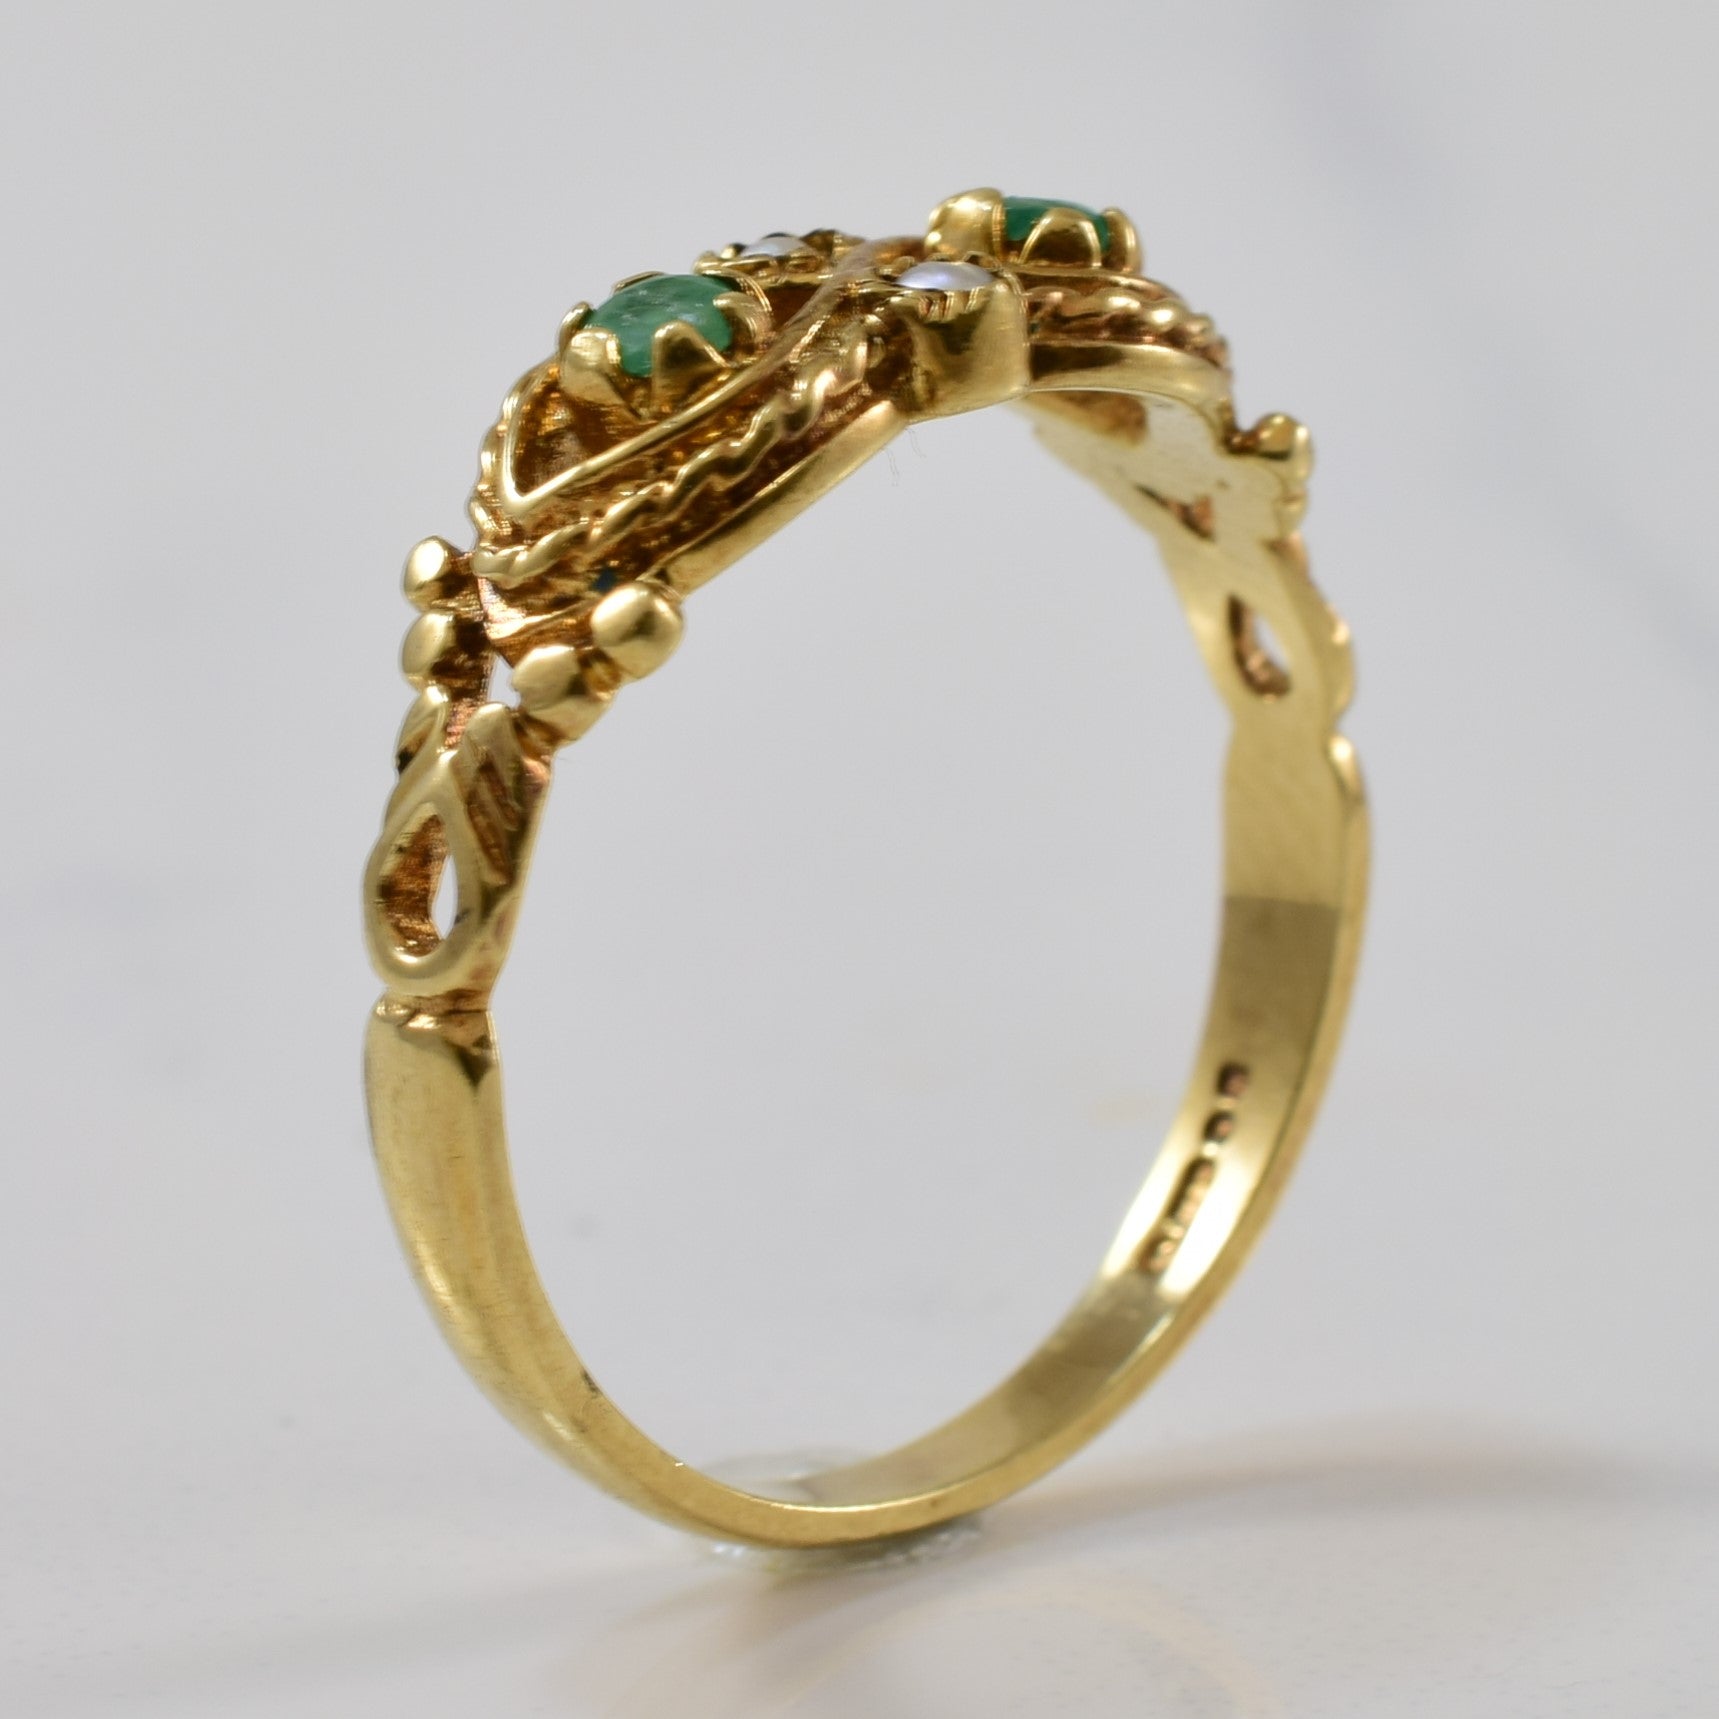 1980s Emerald & Seed Pearl Ring | 0.10ctw, 0.10ctw | SZ 7.5 |